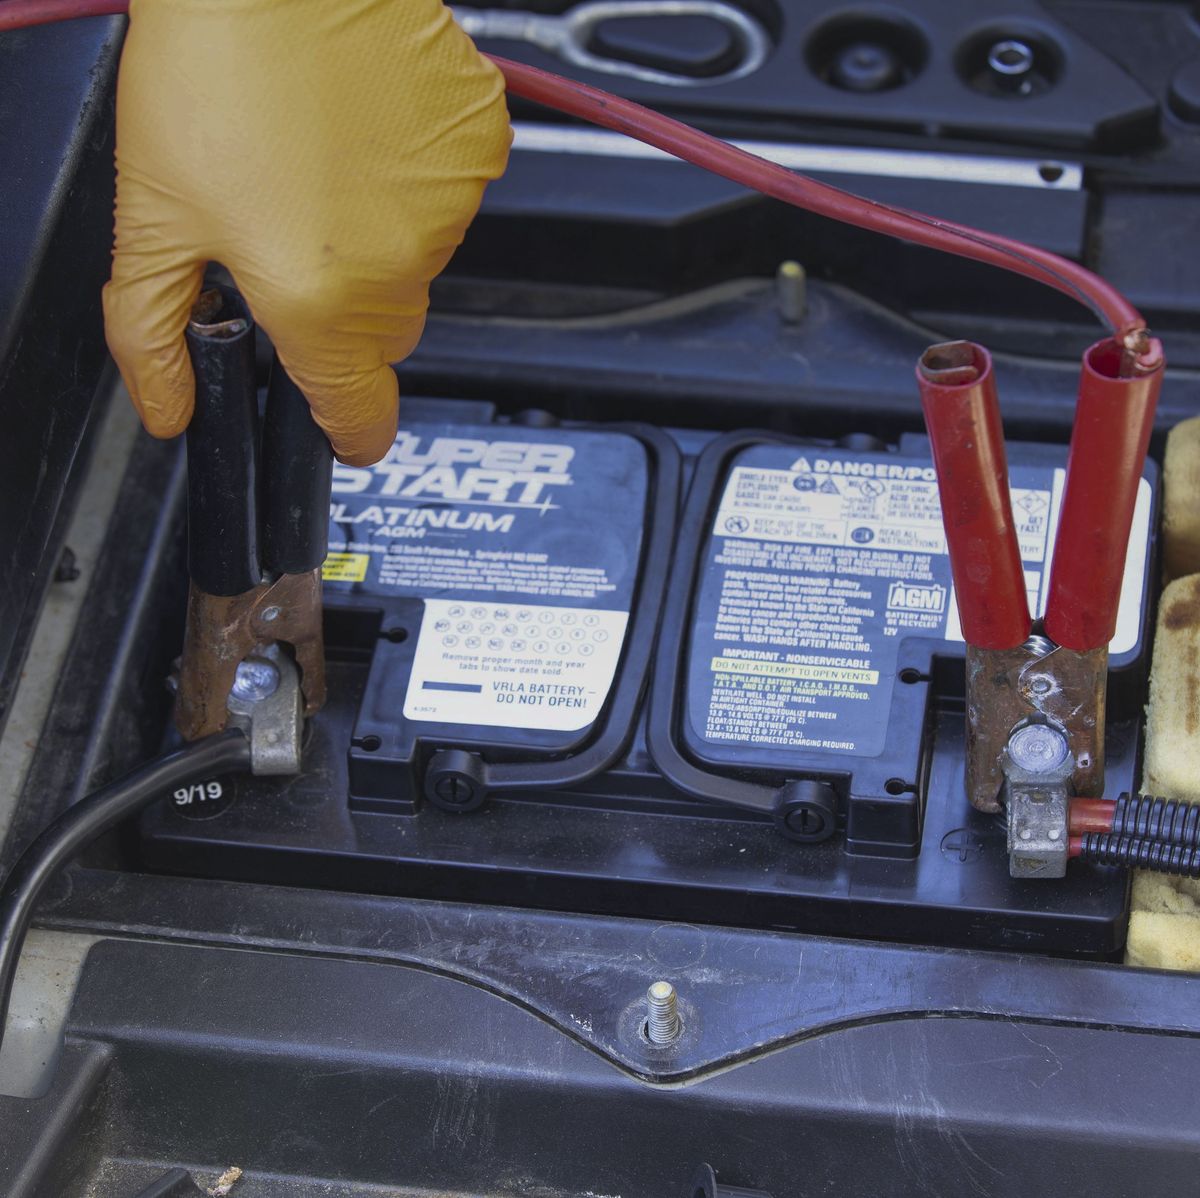 3 Reasons Why Everyone Needs a Car Battery Charger